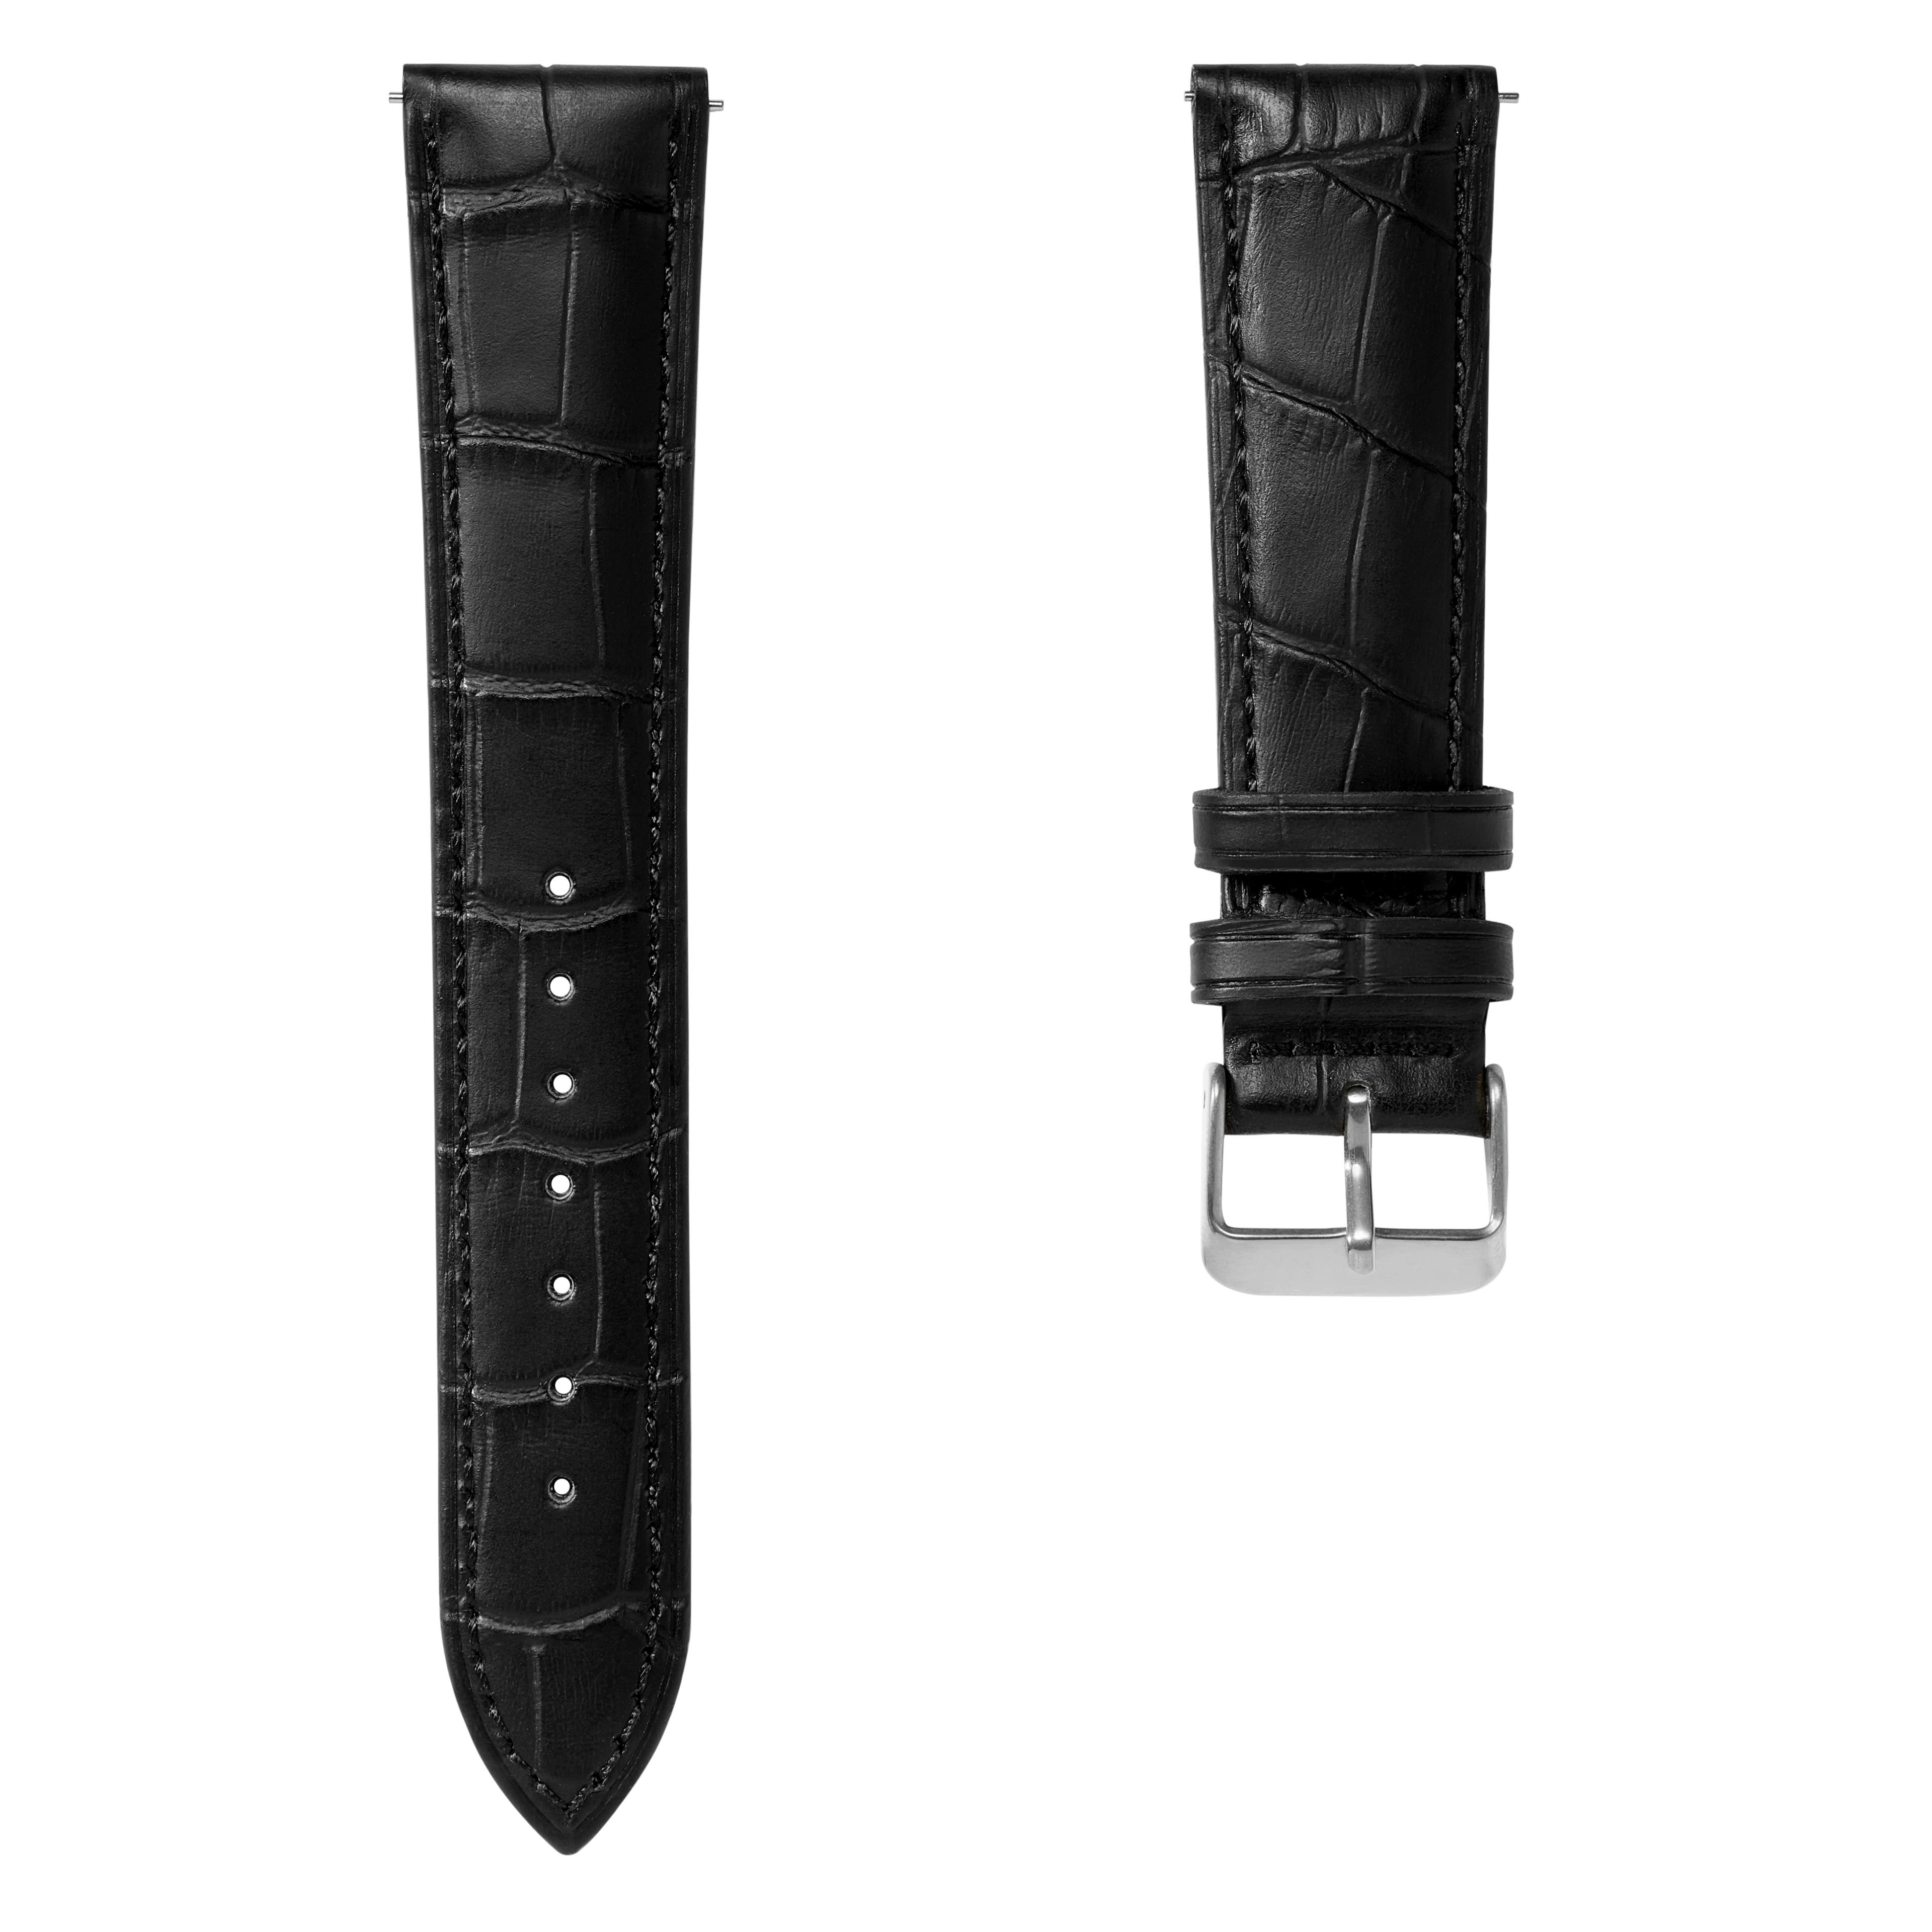 21mm Crocodile-Embossed Black Leather Watch Strap with Silver-Tone Buckle – Quick Release